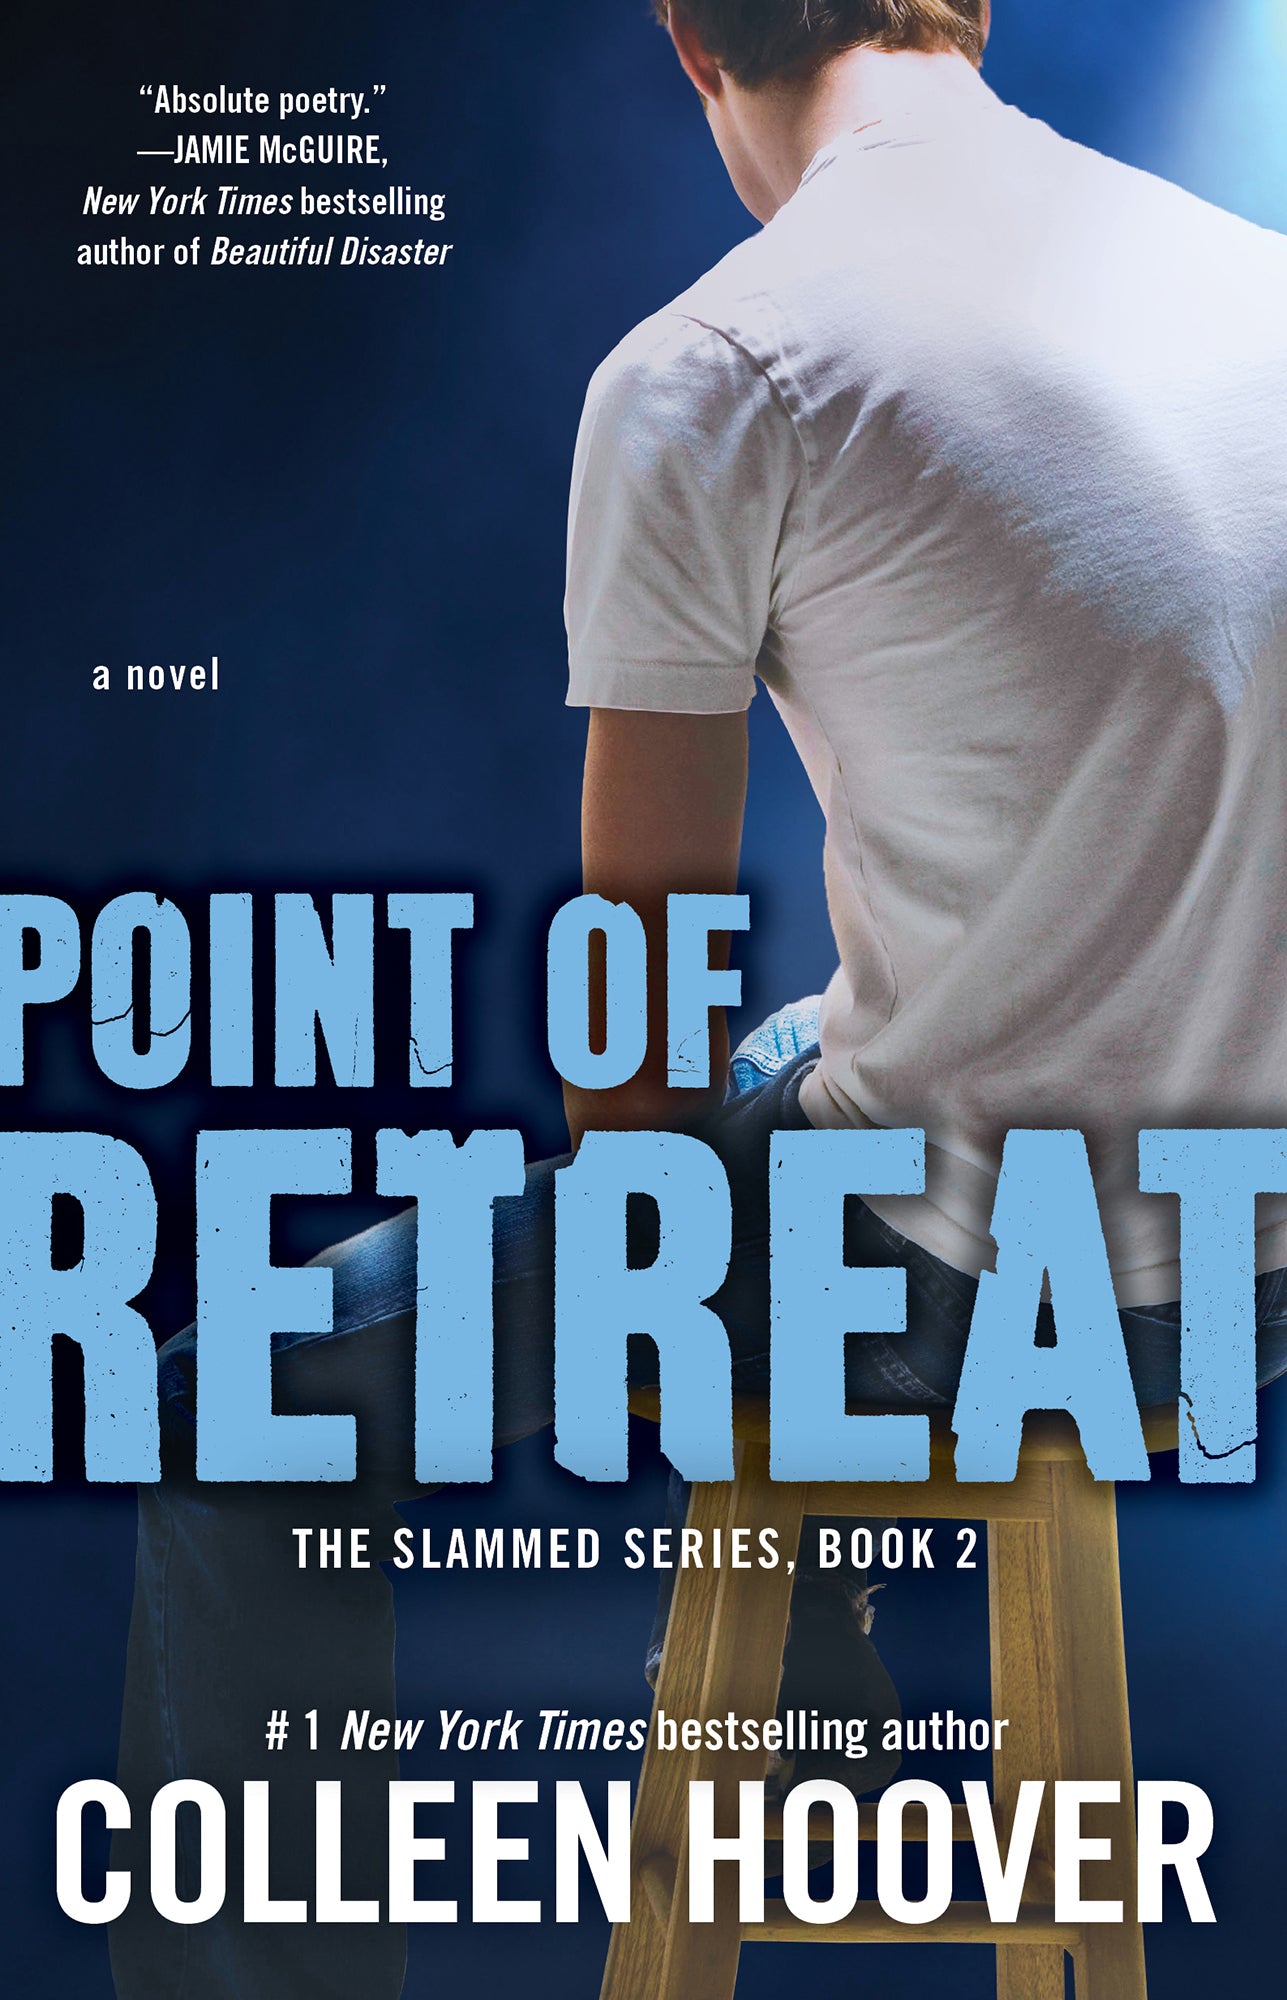 POINT OF RETREAT by COLLEEN HOOVER